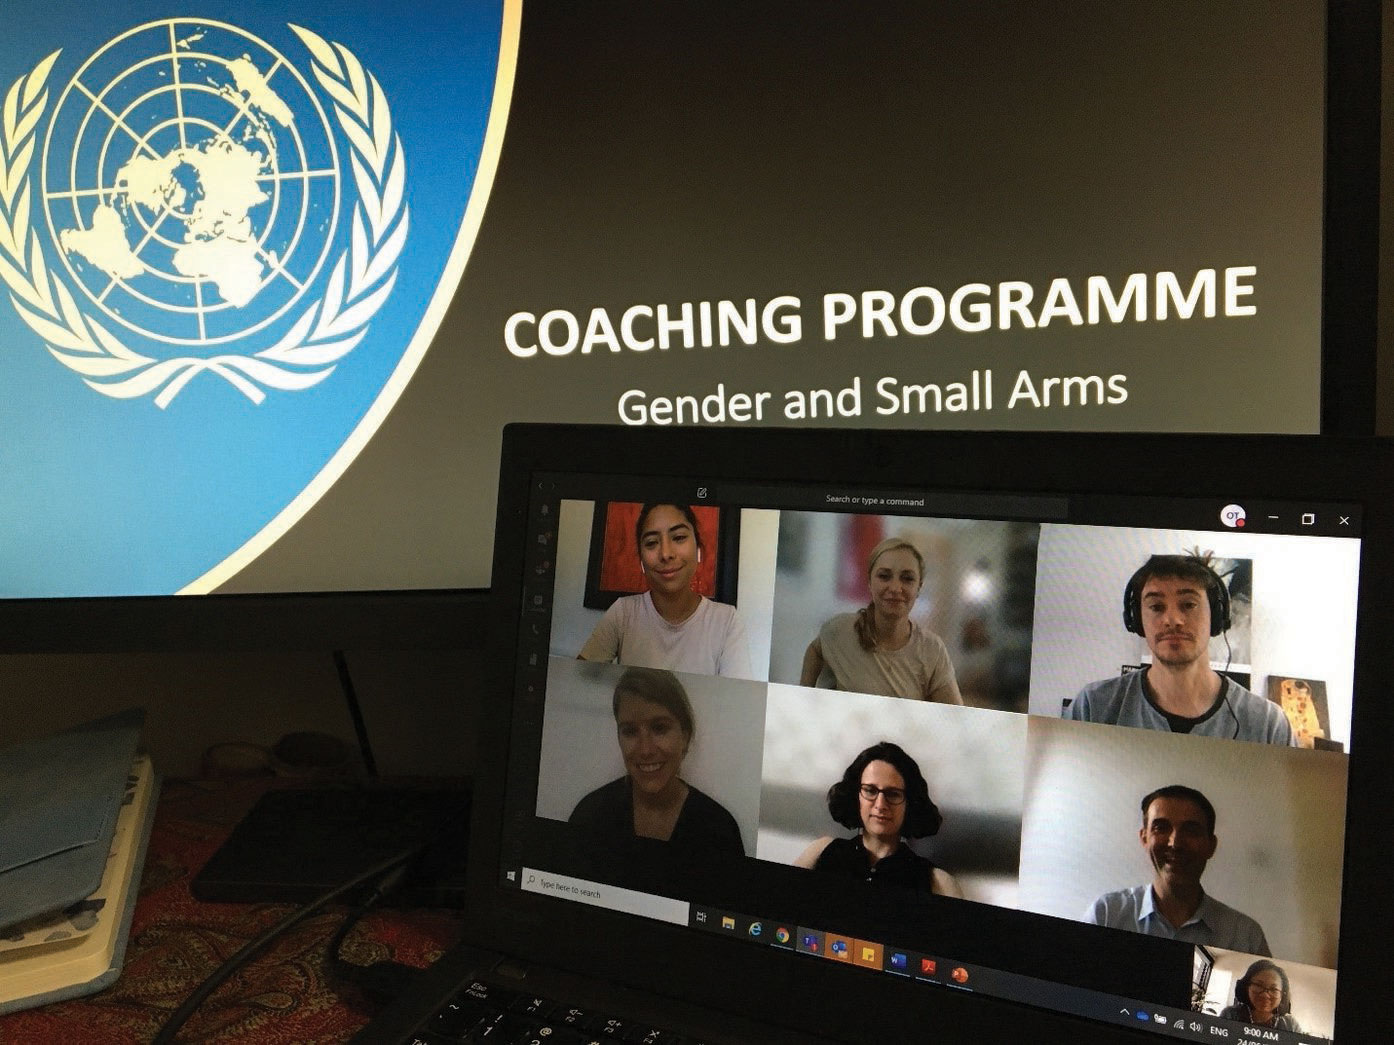 Participants of the coaching programme shown on-screen.